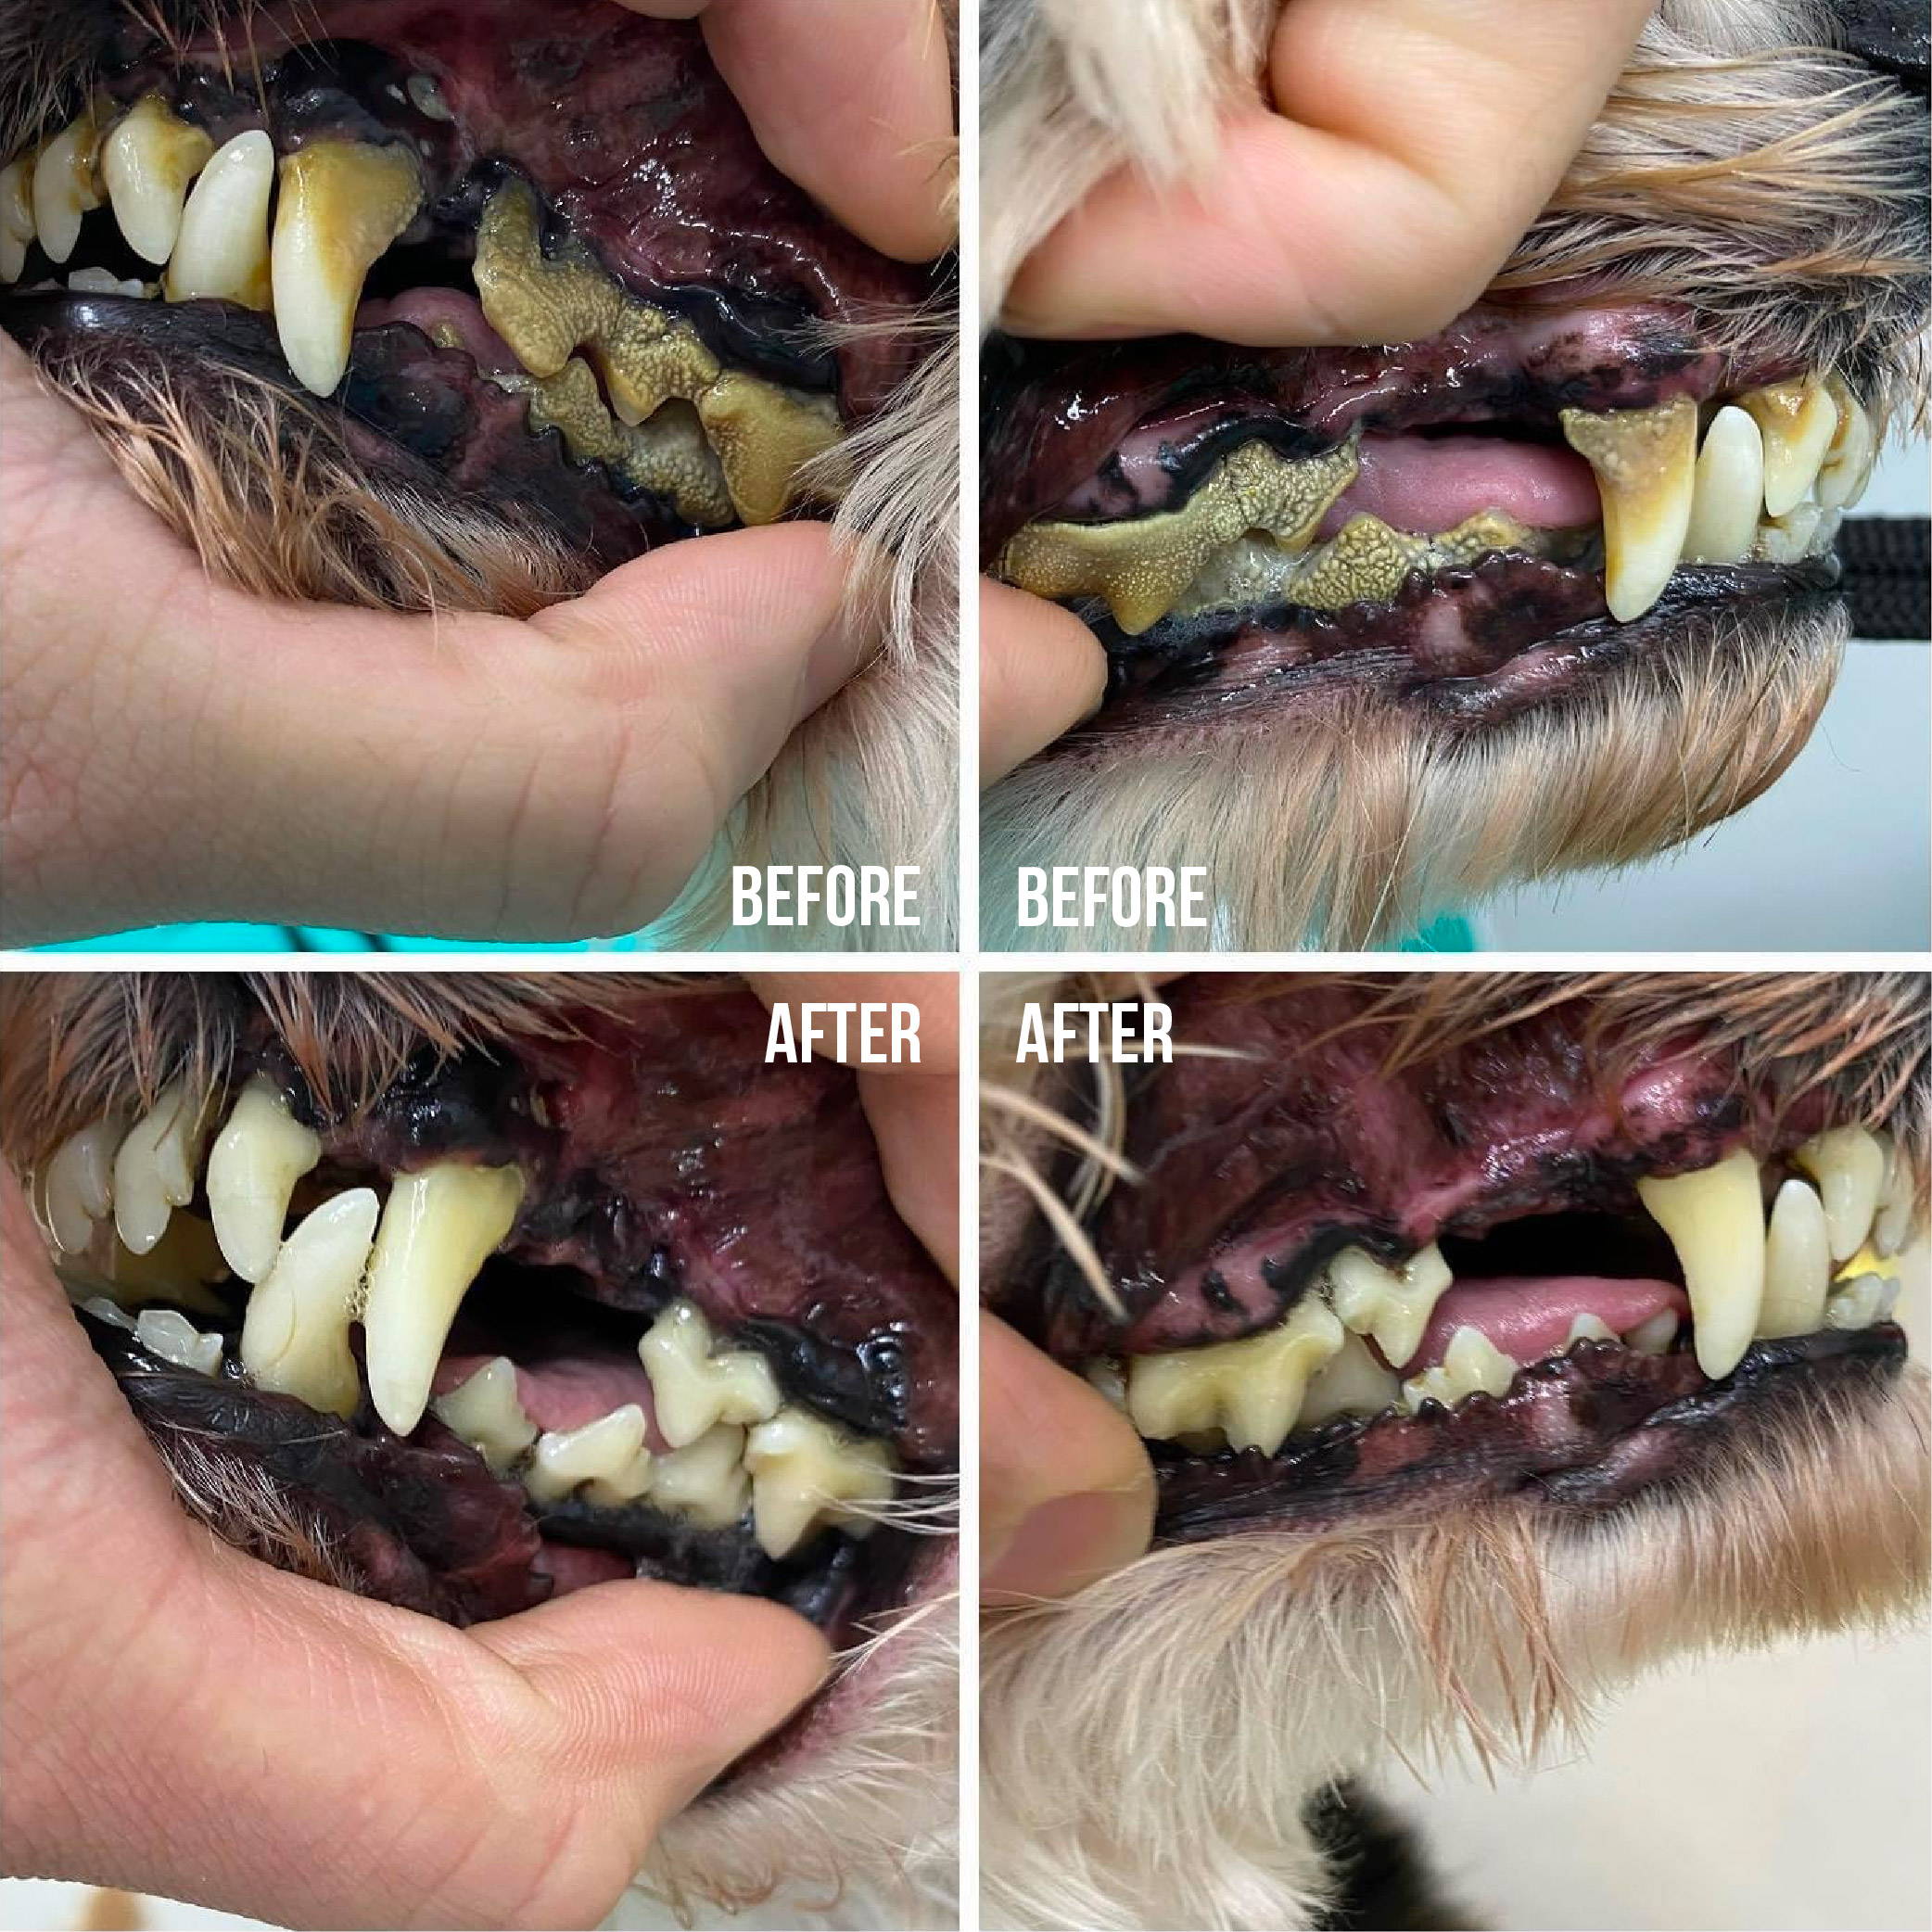 Before & after of the teeth after using our Non-Anesthetic Dental Dog Teeth Cleaning Service.